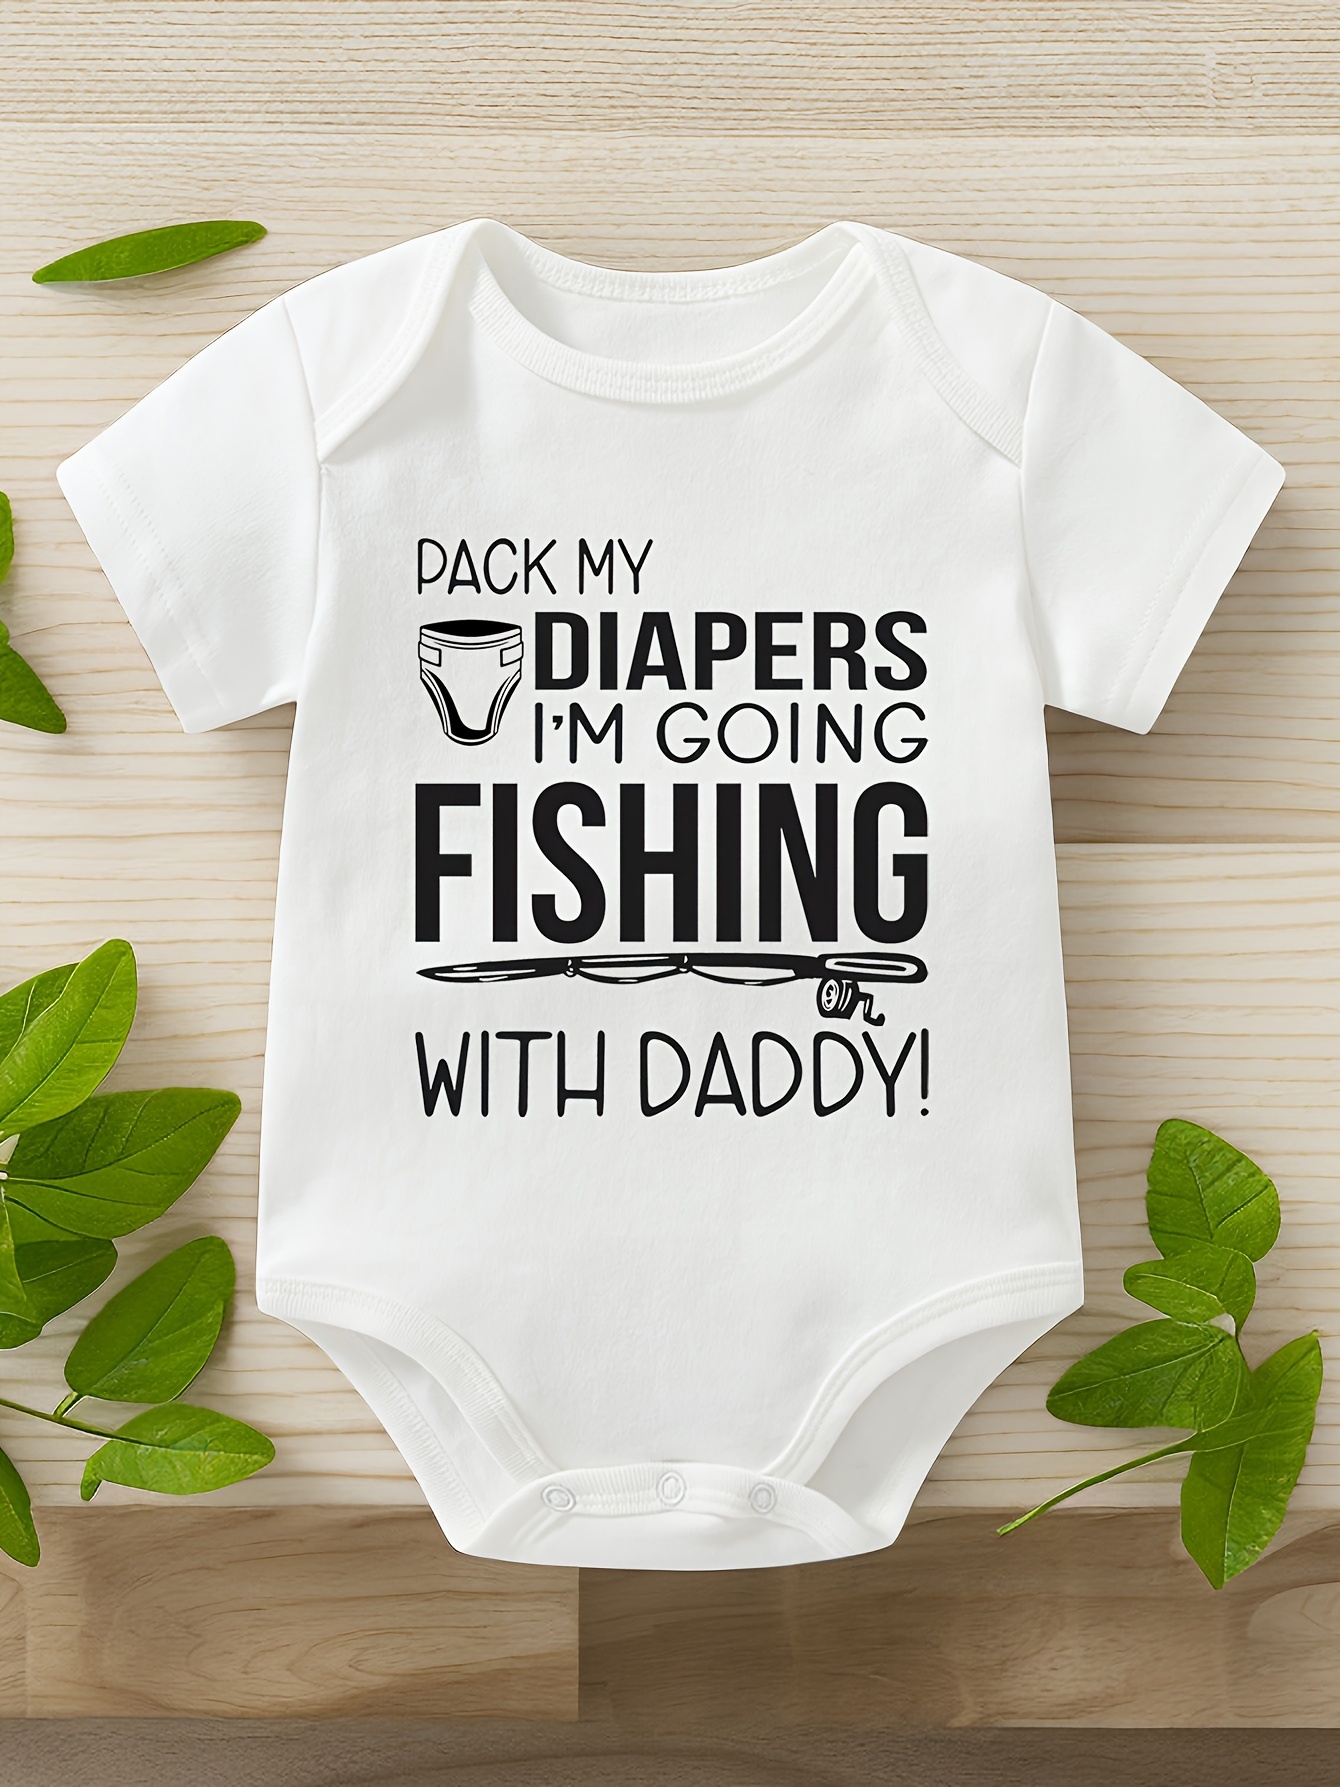  Pack My Diapers I'm Going Fishing With Daddy Onesie